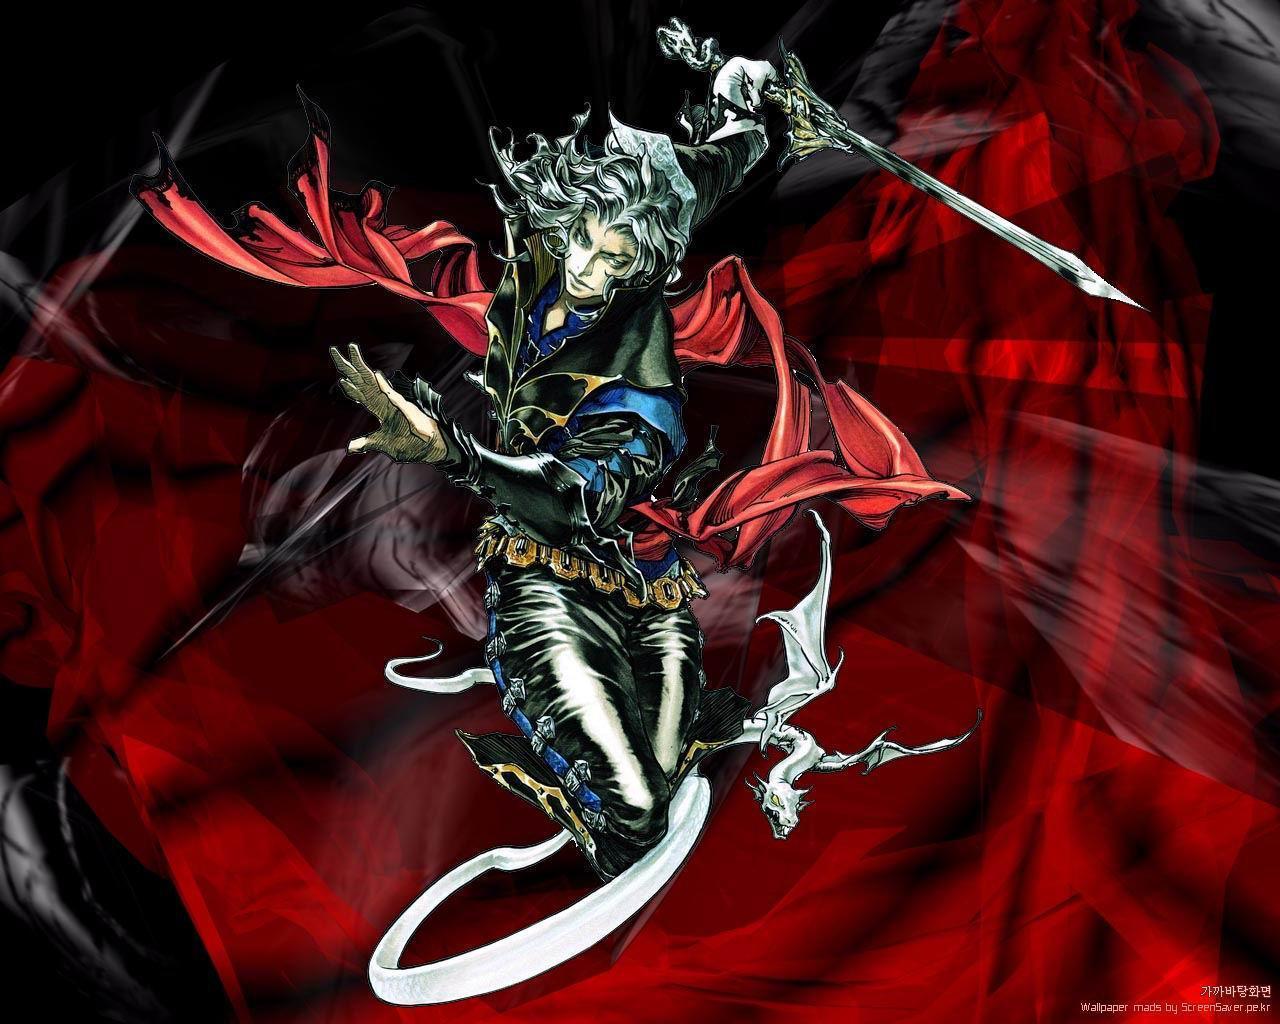 castlevania wallpaper 4 - Image And Wallpaper free to